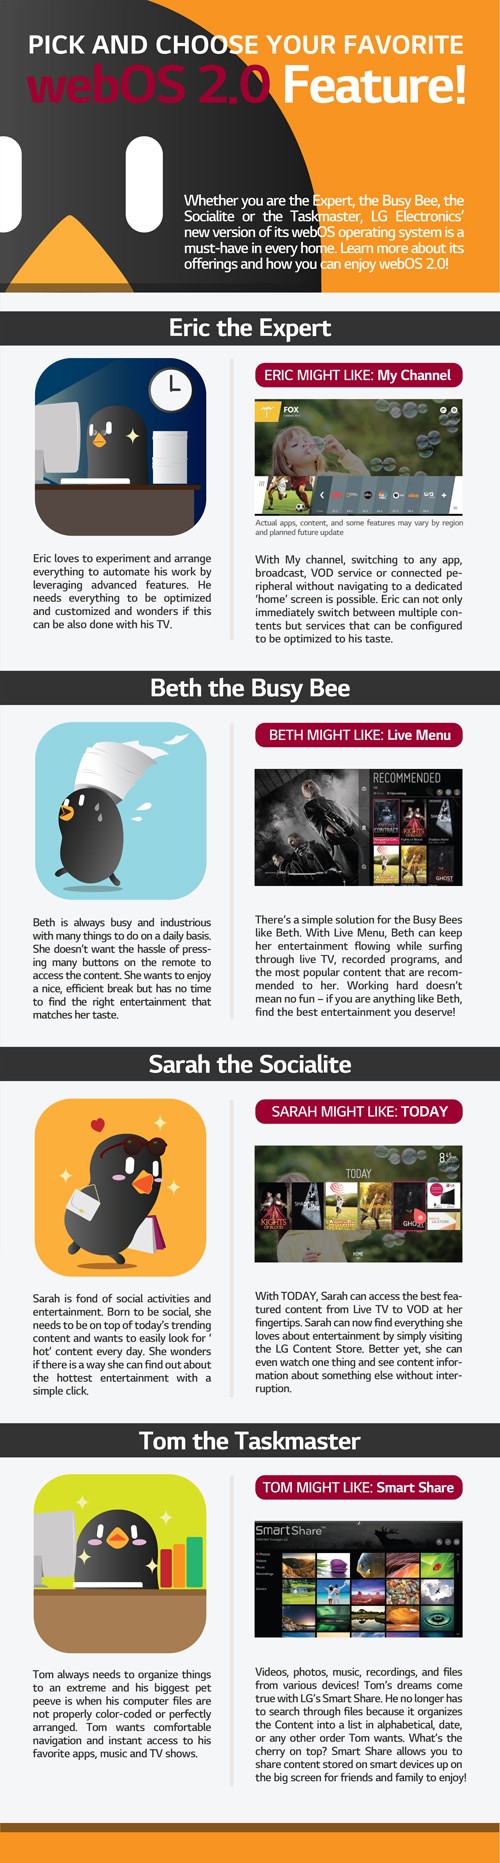 Featuring LG’s Bean Bird characters, this infographic shows four different needs for enhanced smart TV functions are satisfied perfectly by My Channel, Live Menu, Today and Smart Share of the webOS 2.0 smart TV platform.